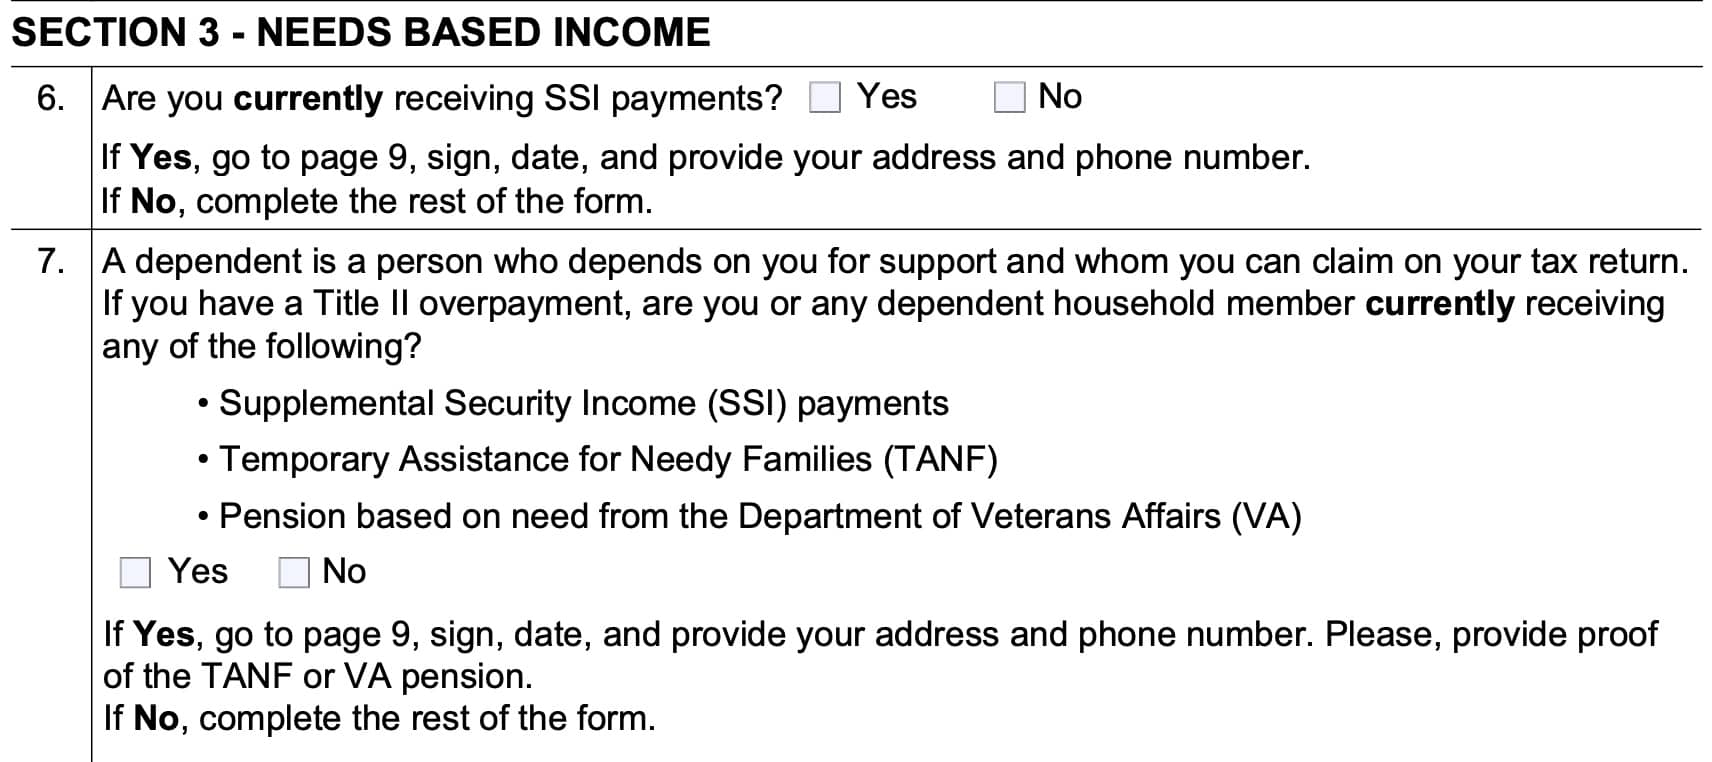 form ssa 632-bk, section 3: Needs based income